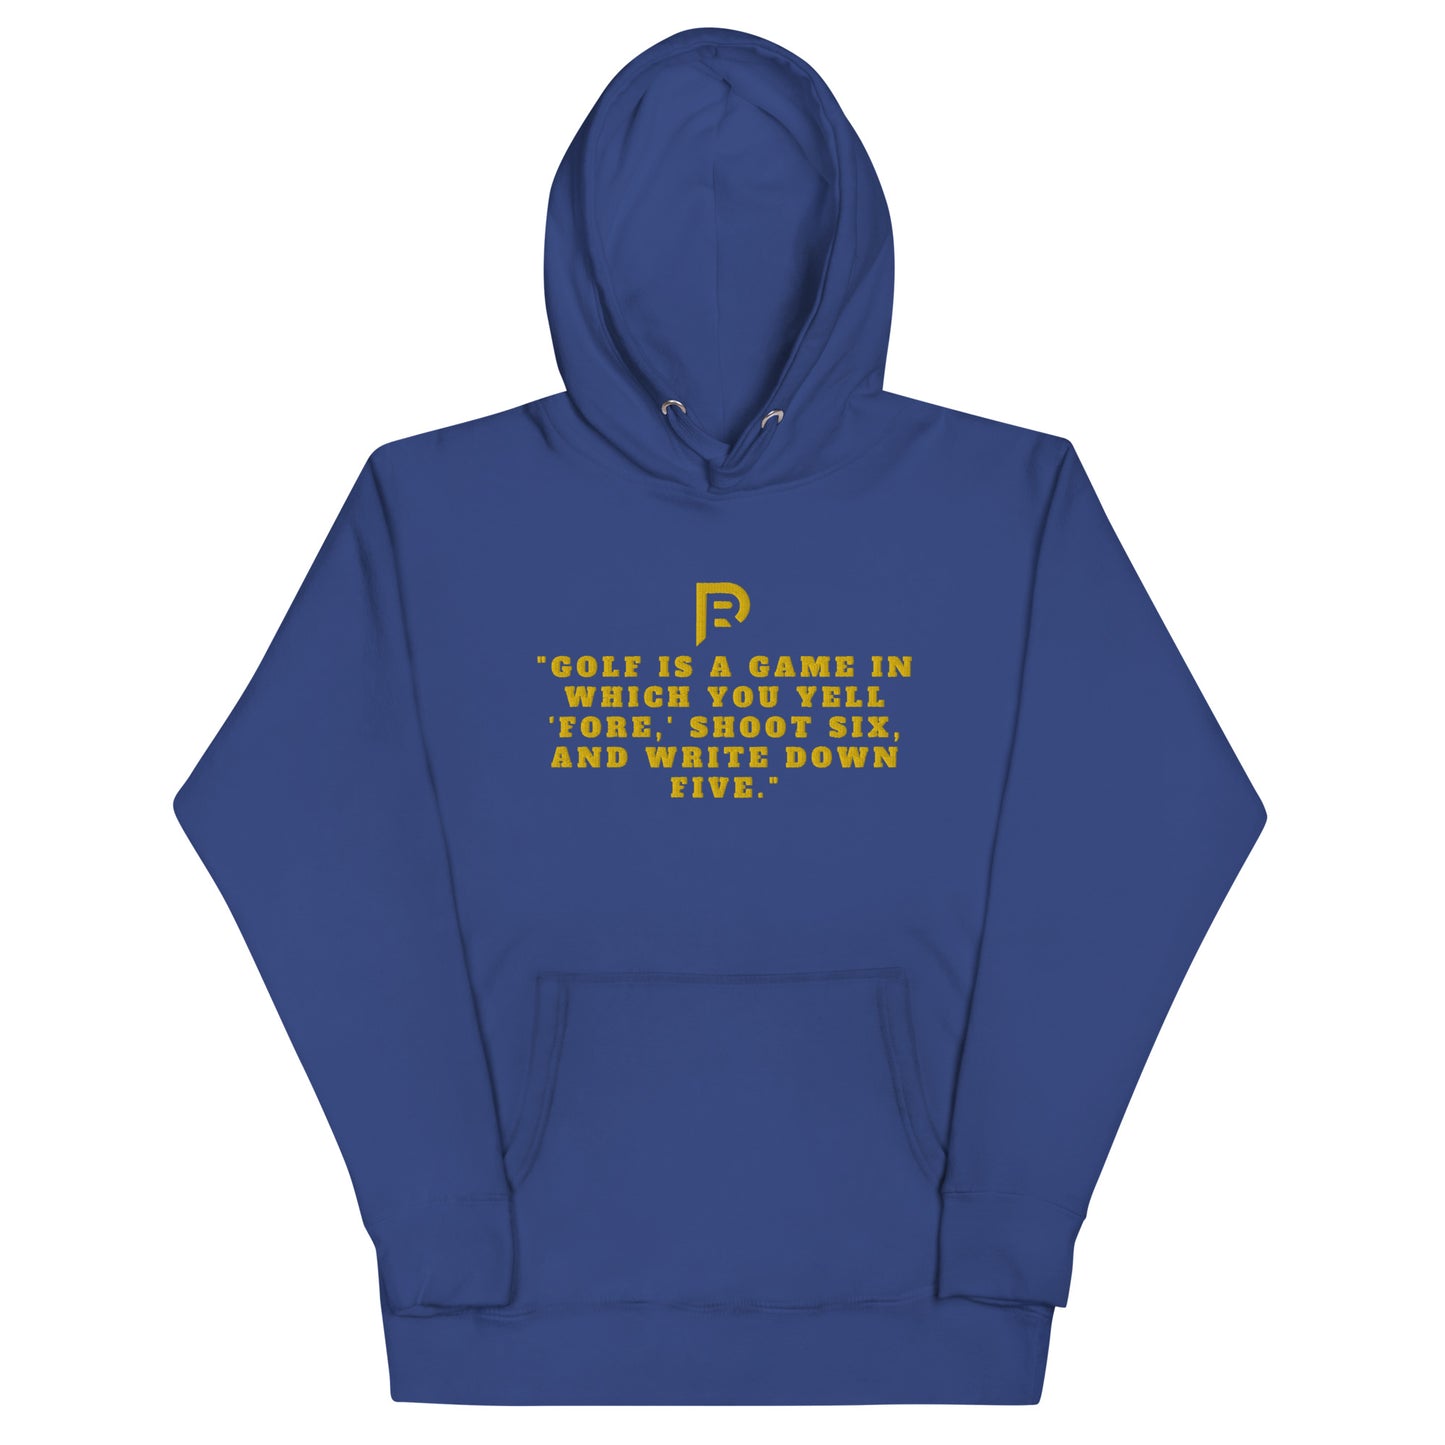 "Golf is a game in which you yell 'fore,' shoot six, and write down five."Hoodie